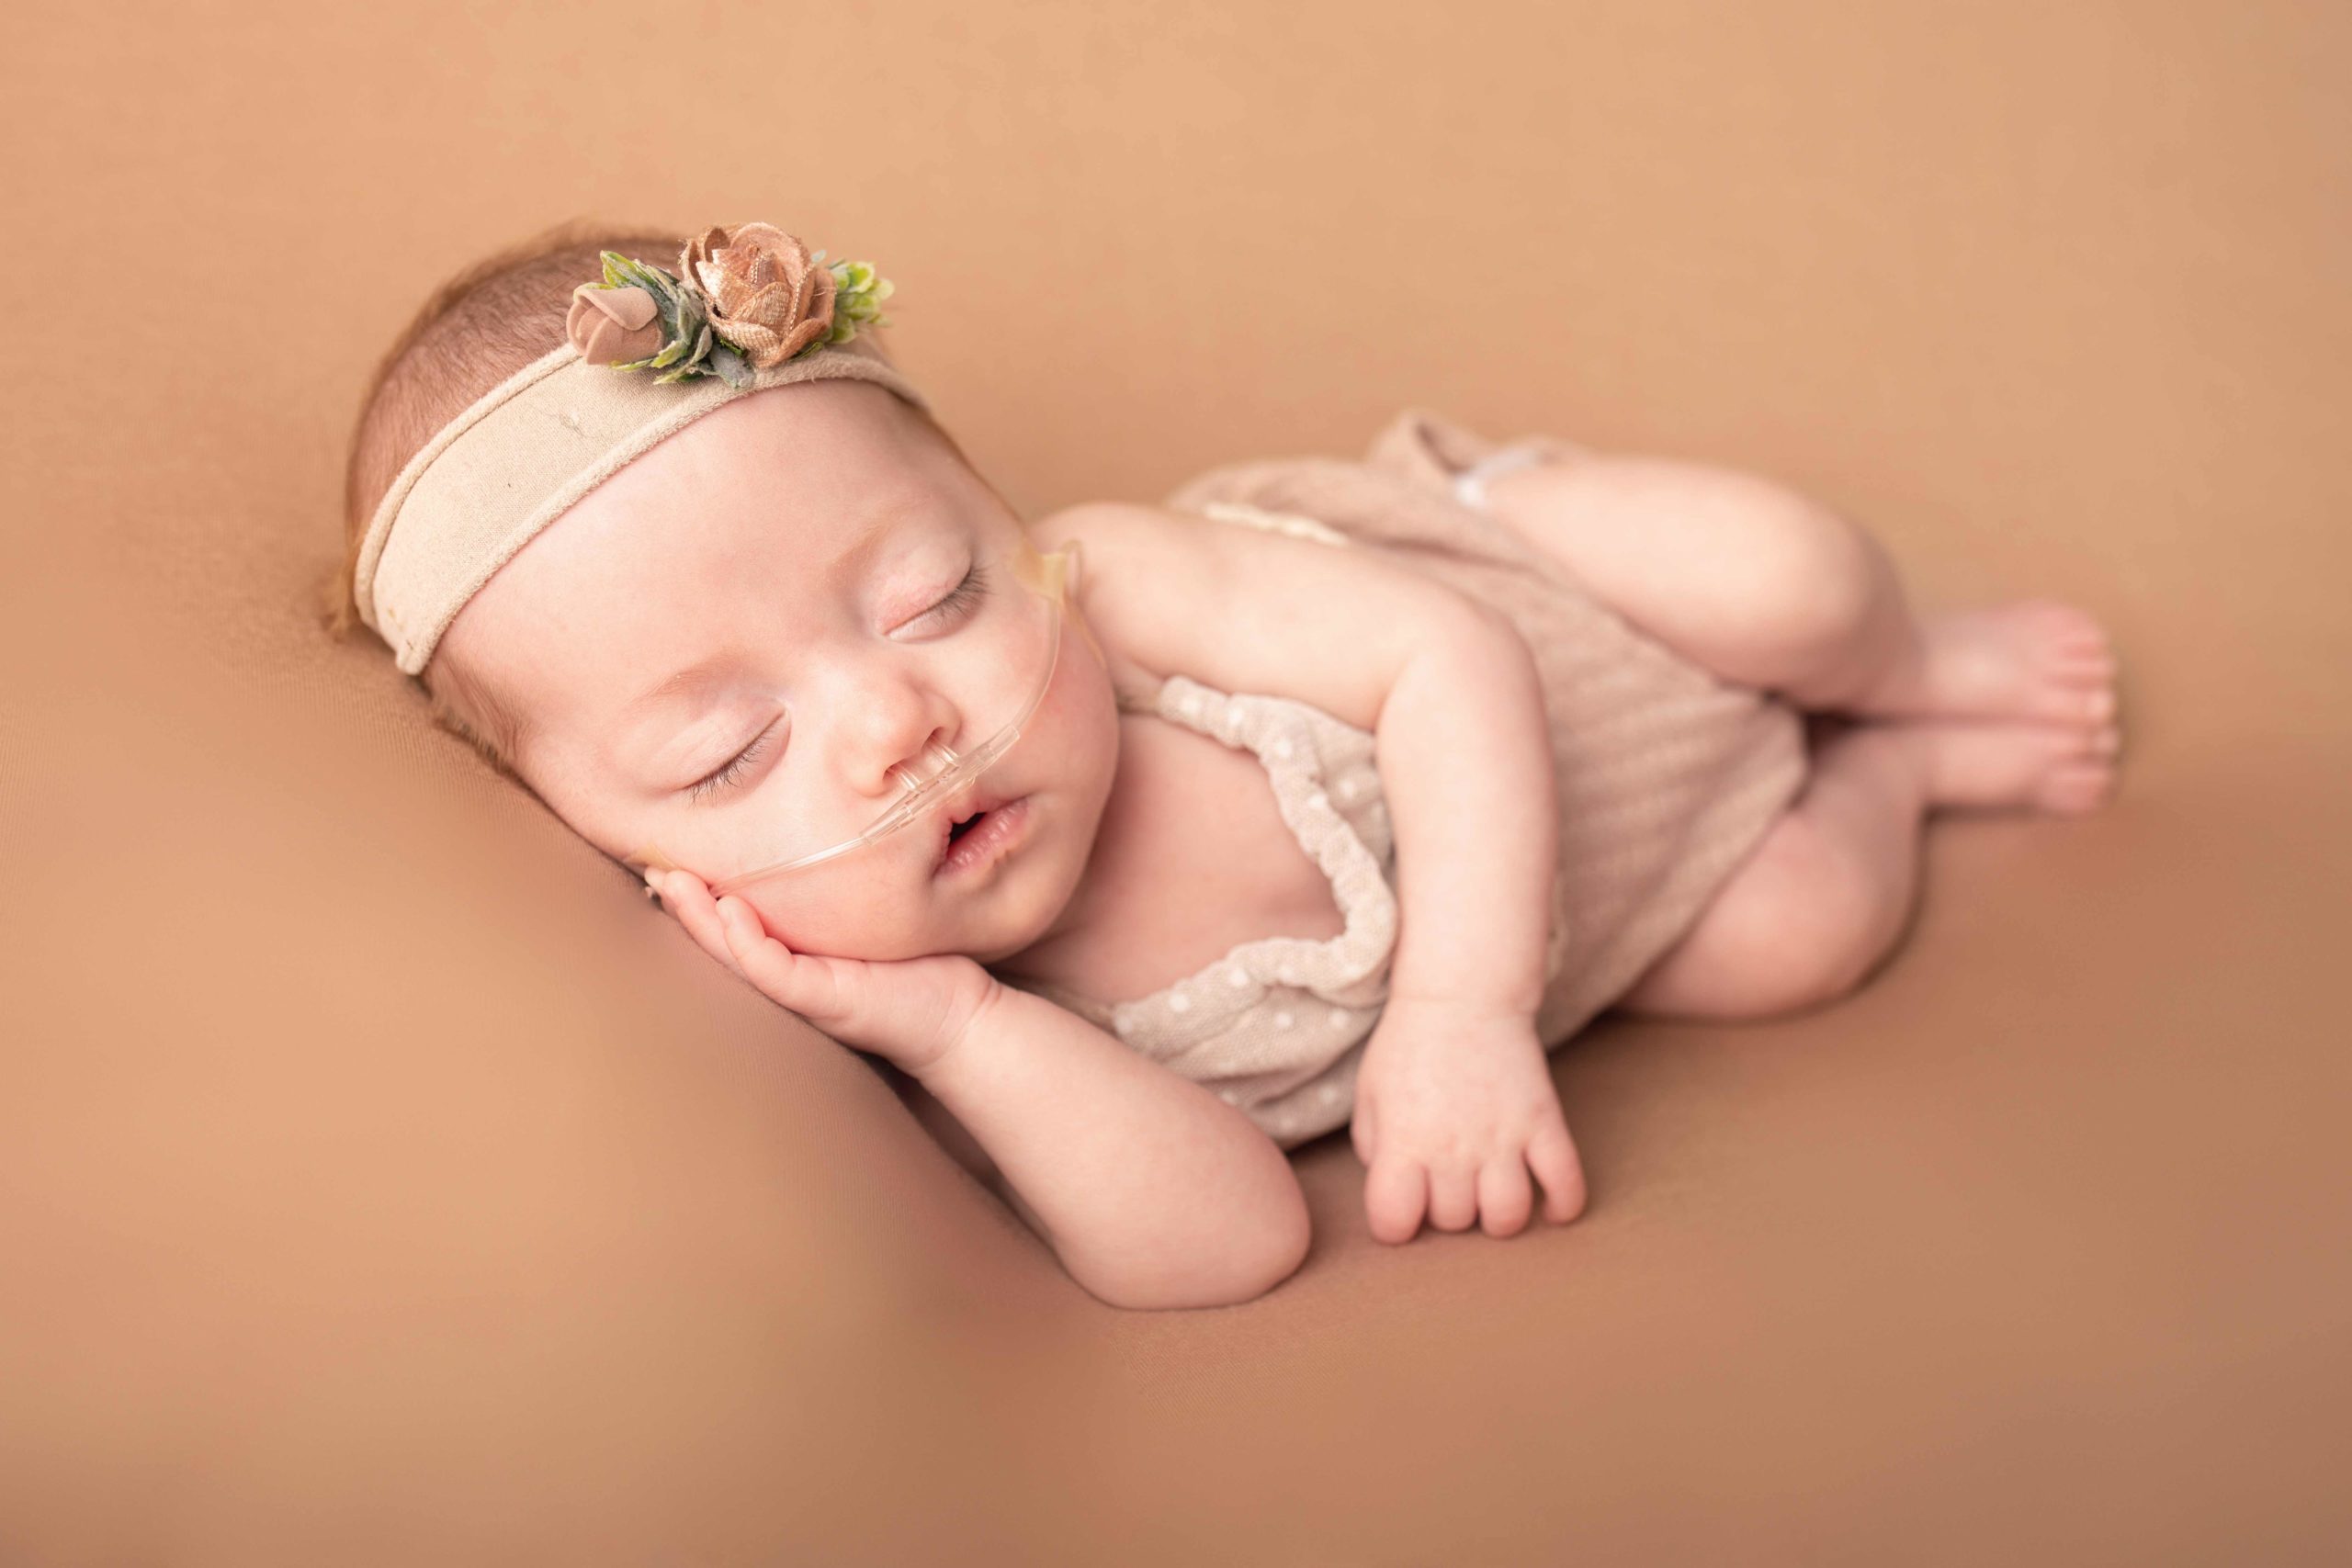 Newborn baby girl laying on her side with head in hand. Wearing cream romper by Newborn photographer in Medway